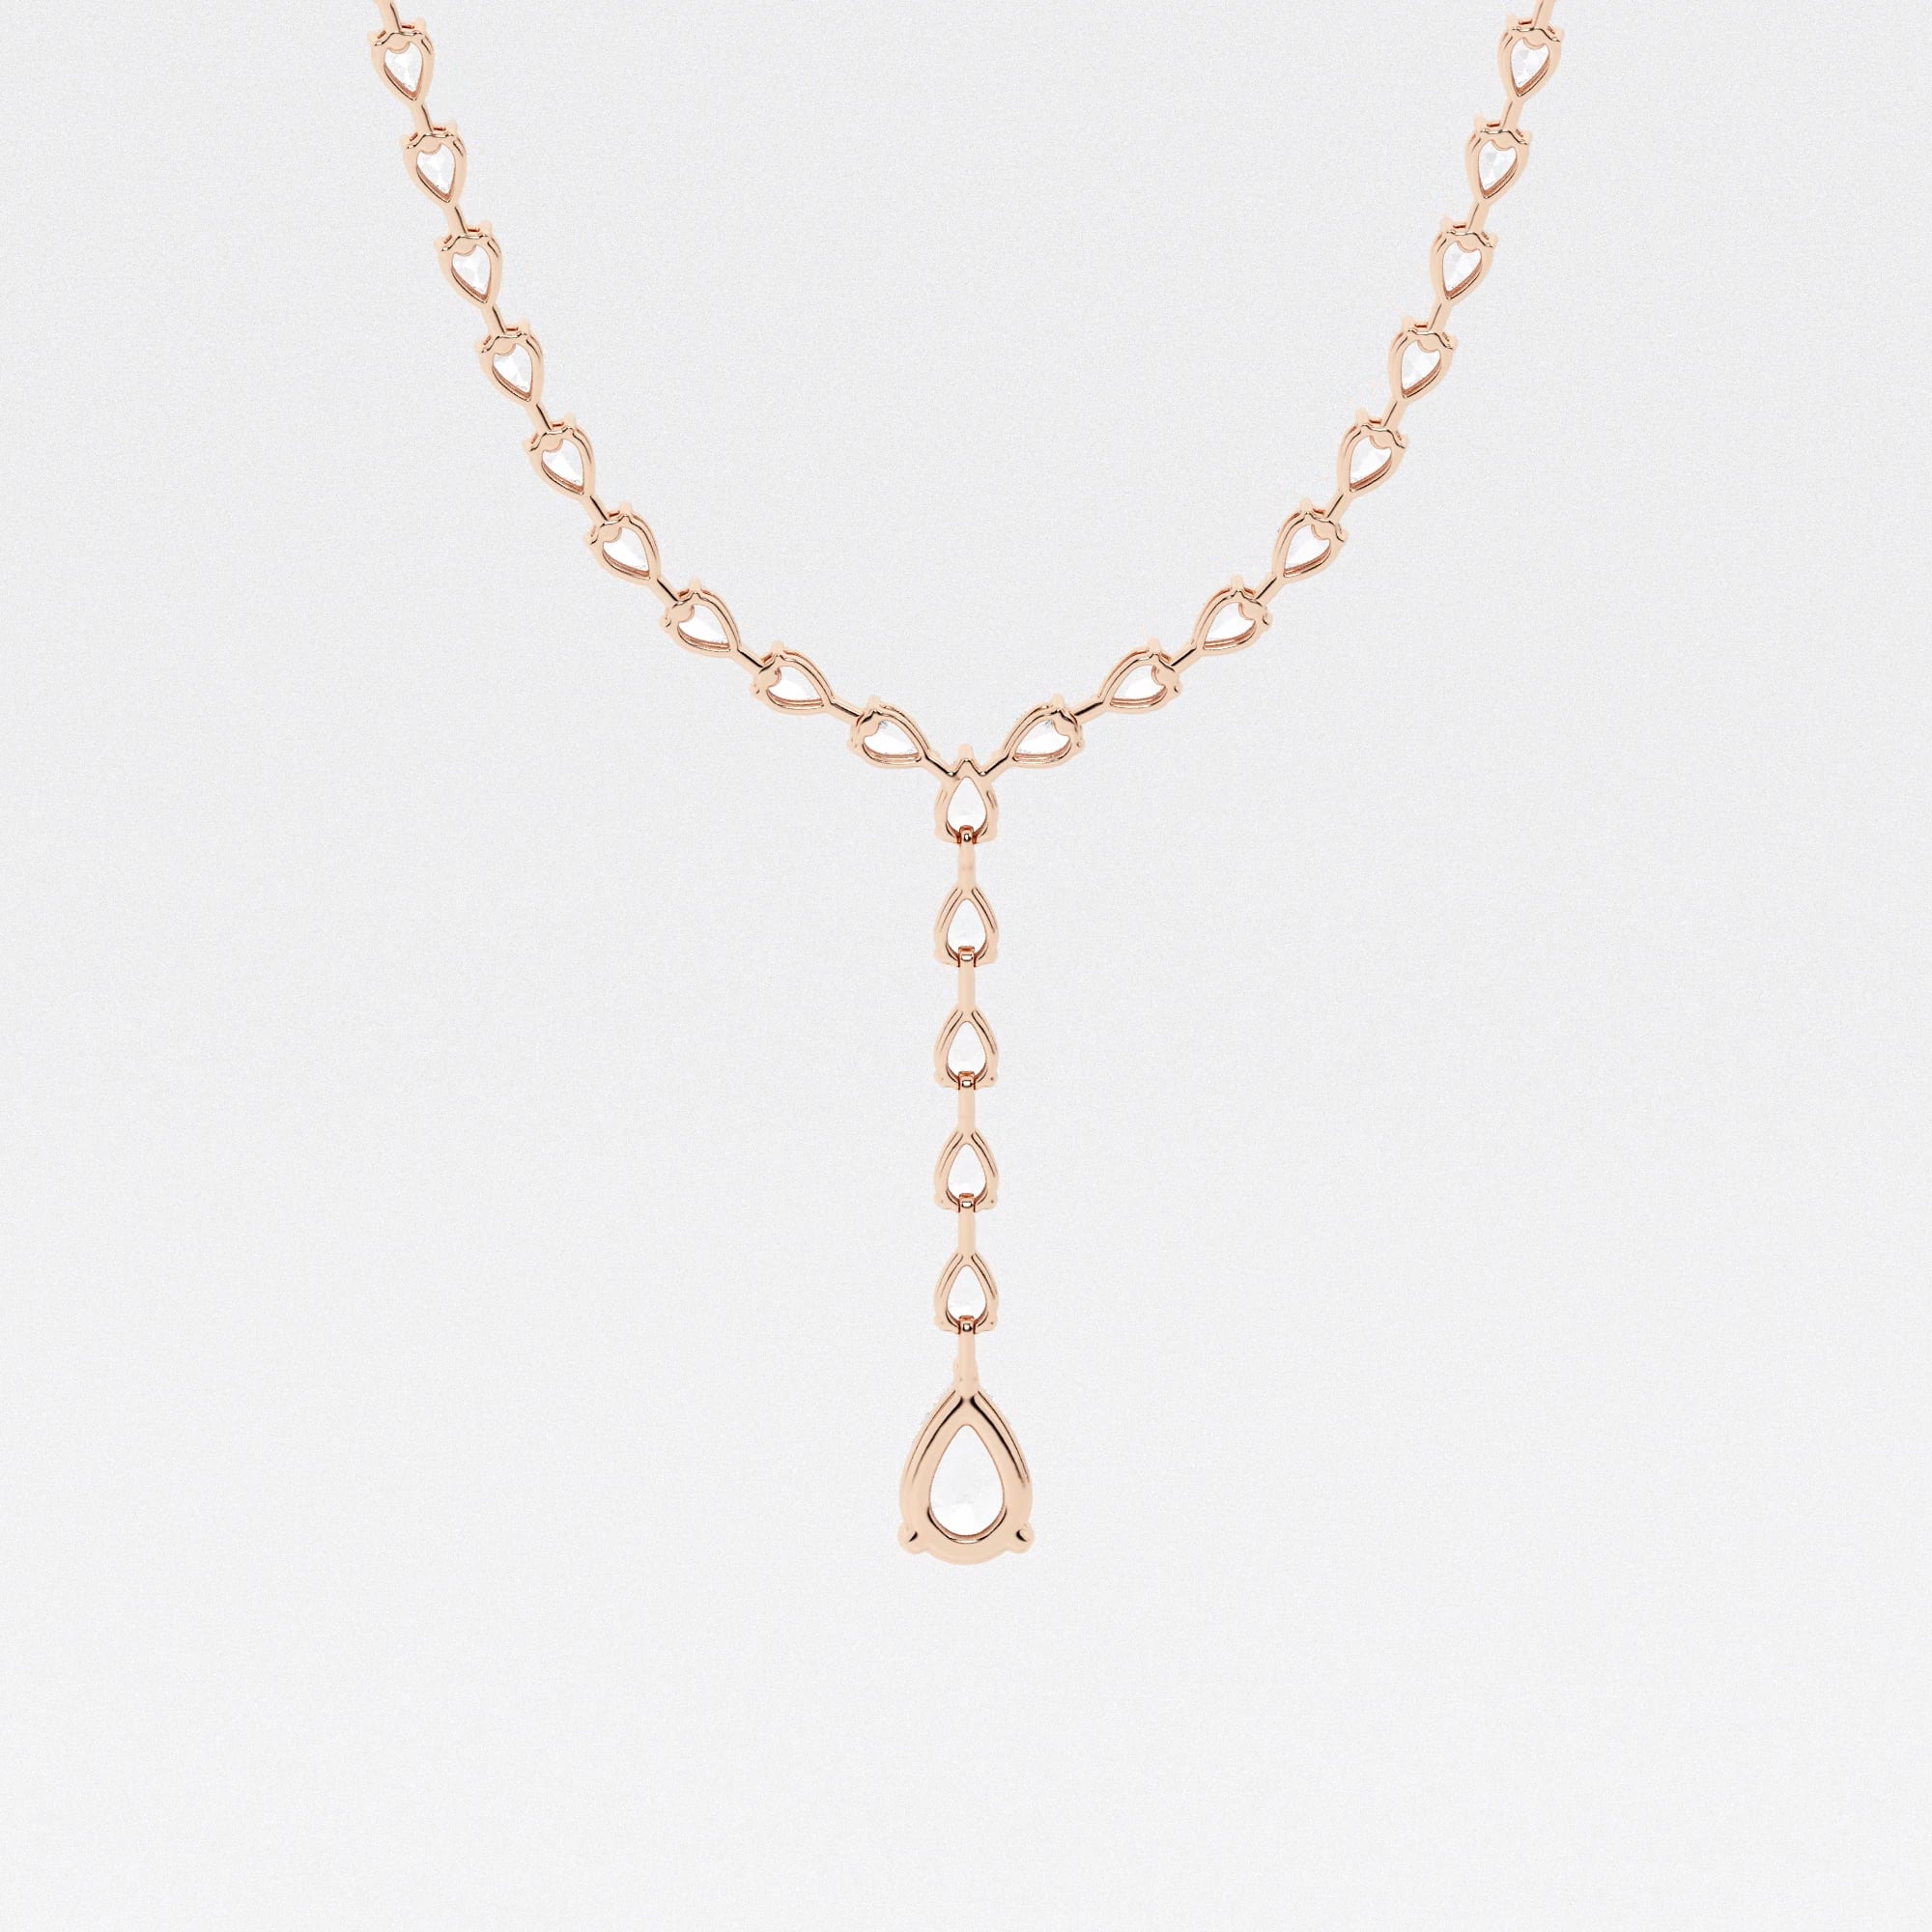 product video for Badgley Mischka 17 ctw Pear Lab Grown Diamond Lariat Tennis Necklace